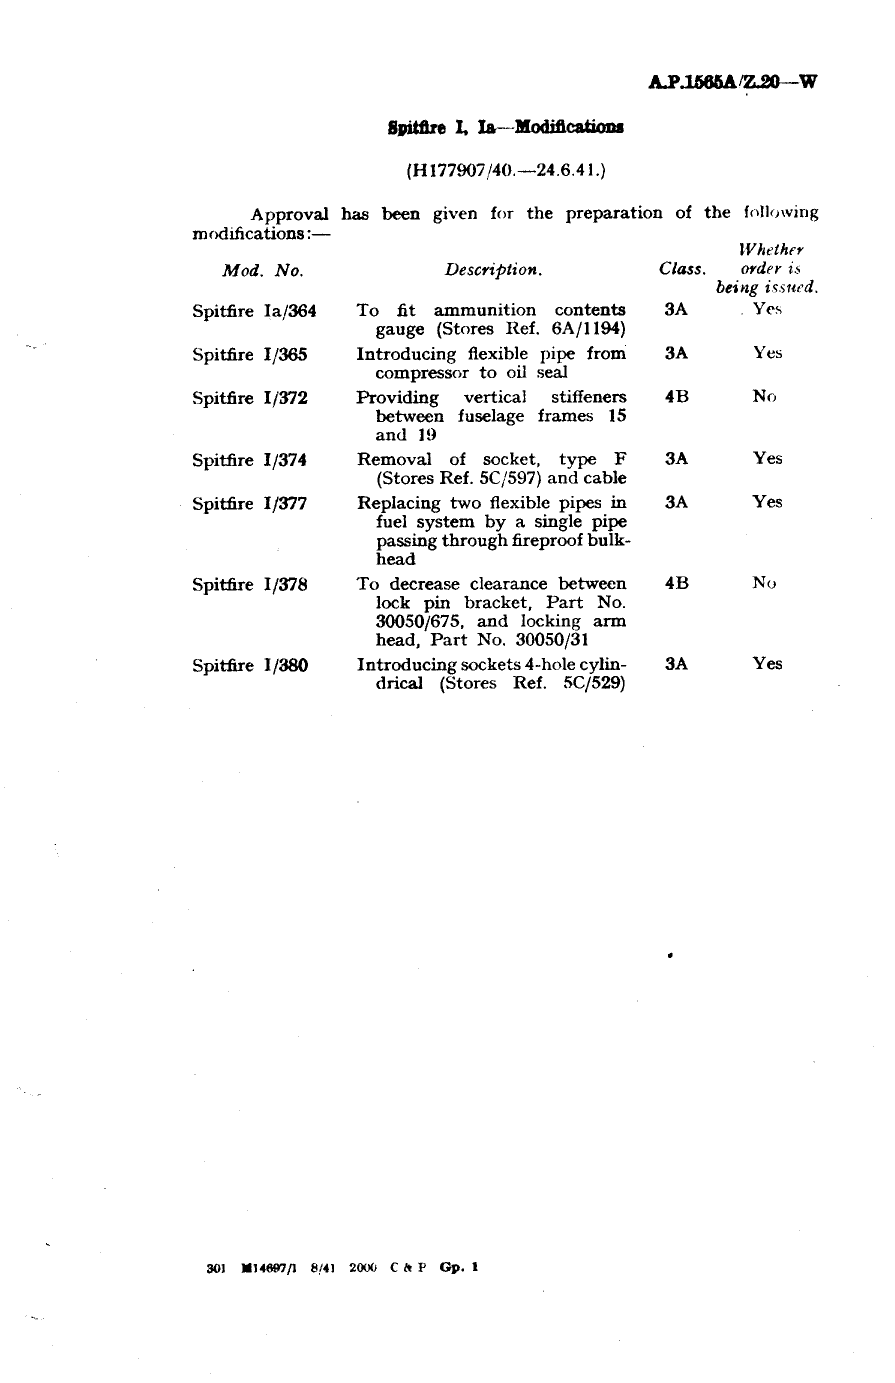 Sample page 1 from AirCorps Library document: Spitfire I and IA Modifications 364, 365, 372, 374, 377, 378 and 380